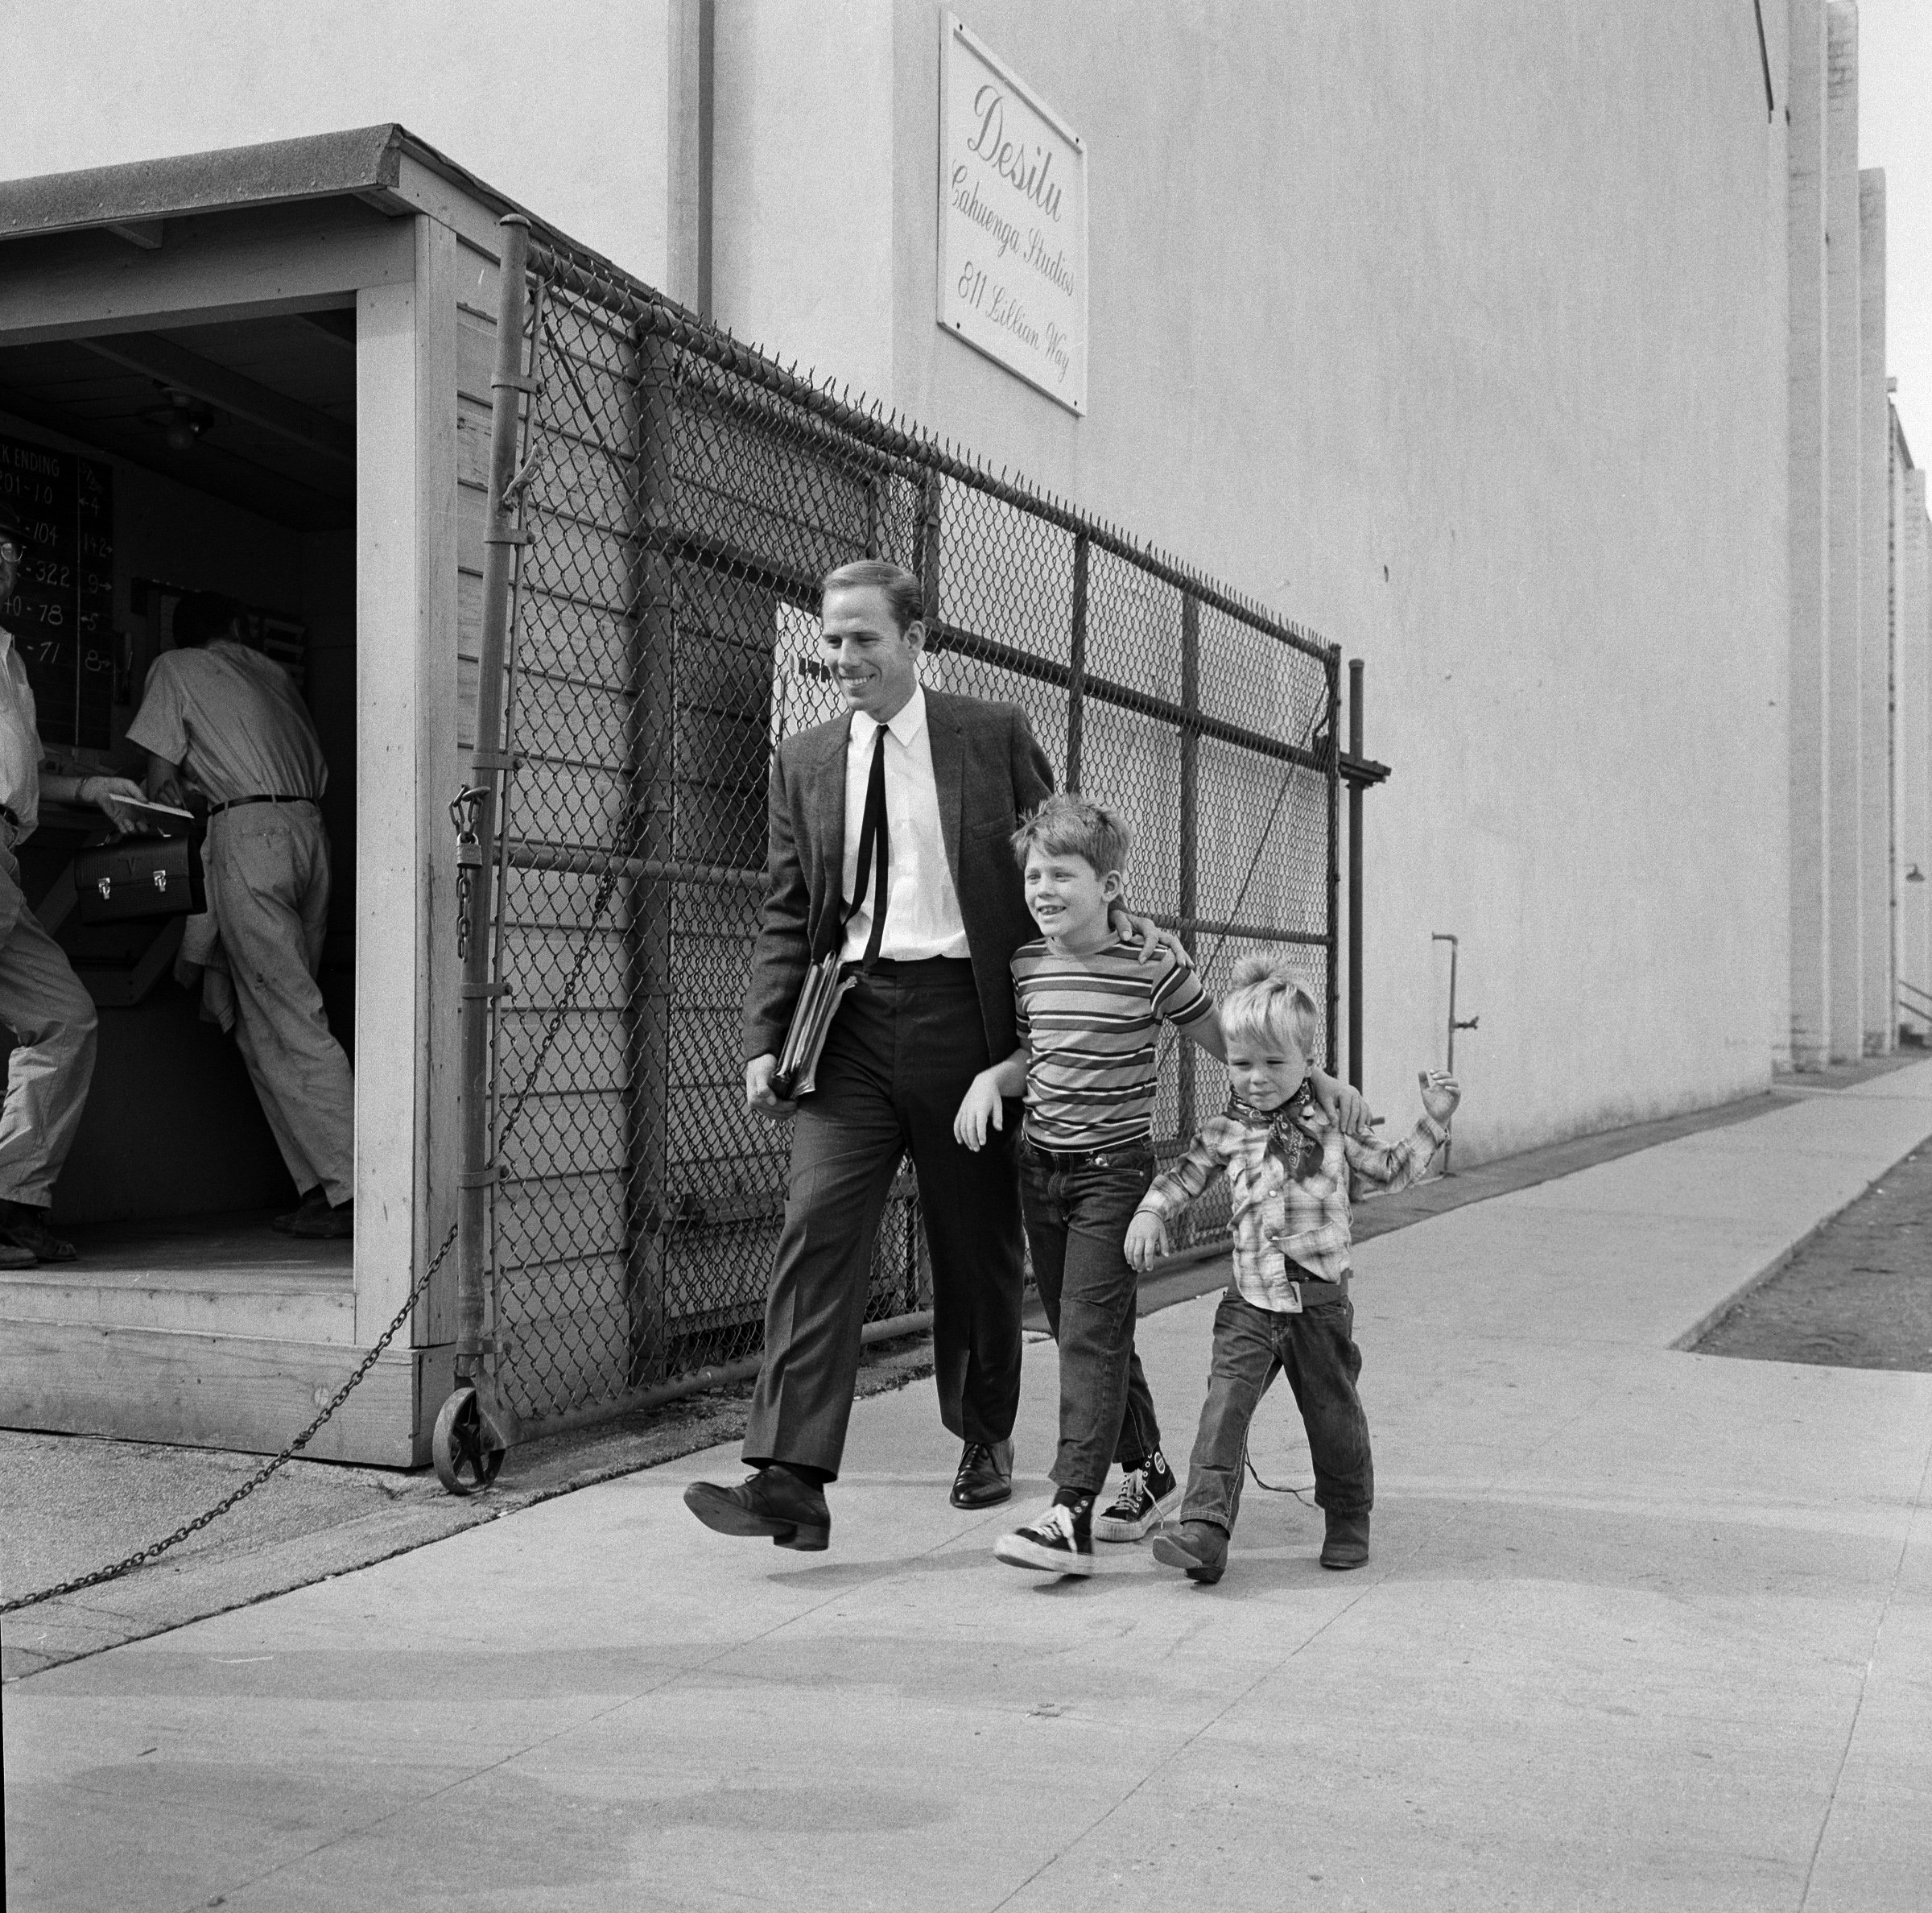 Left to right: Rance Howard is in a dark suit and tie, walking with his young sons Ron Howard and Clint Howard on 'The Andy Griffith Show' set in 1963.